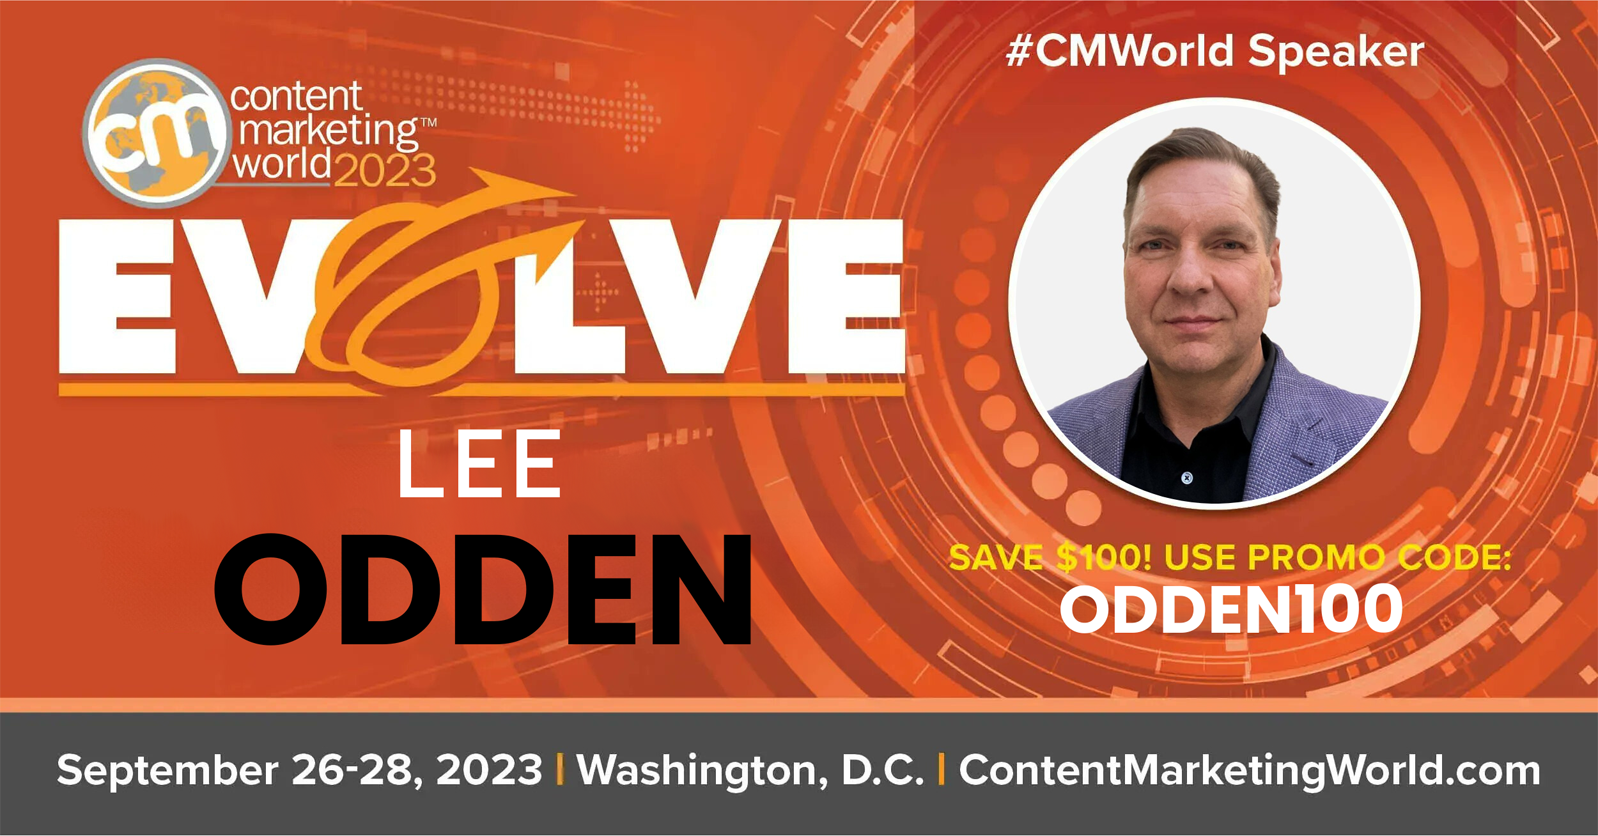 See Lee Odden speaking at Content Marketing World 2023 image